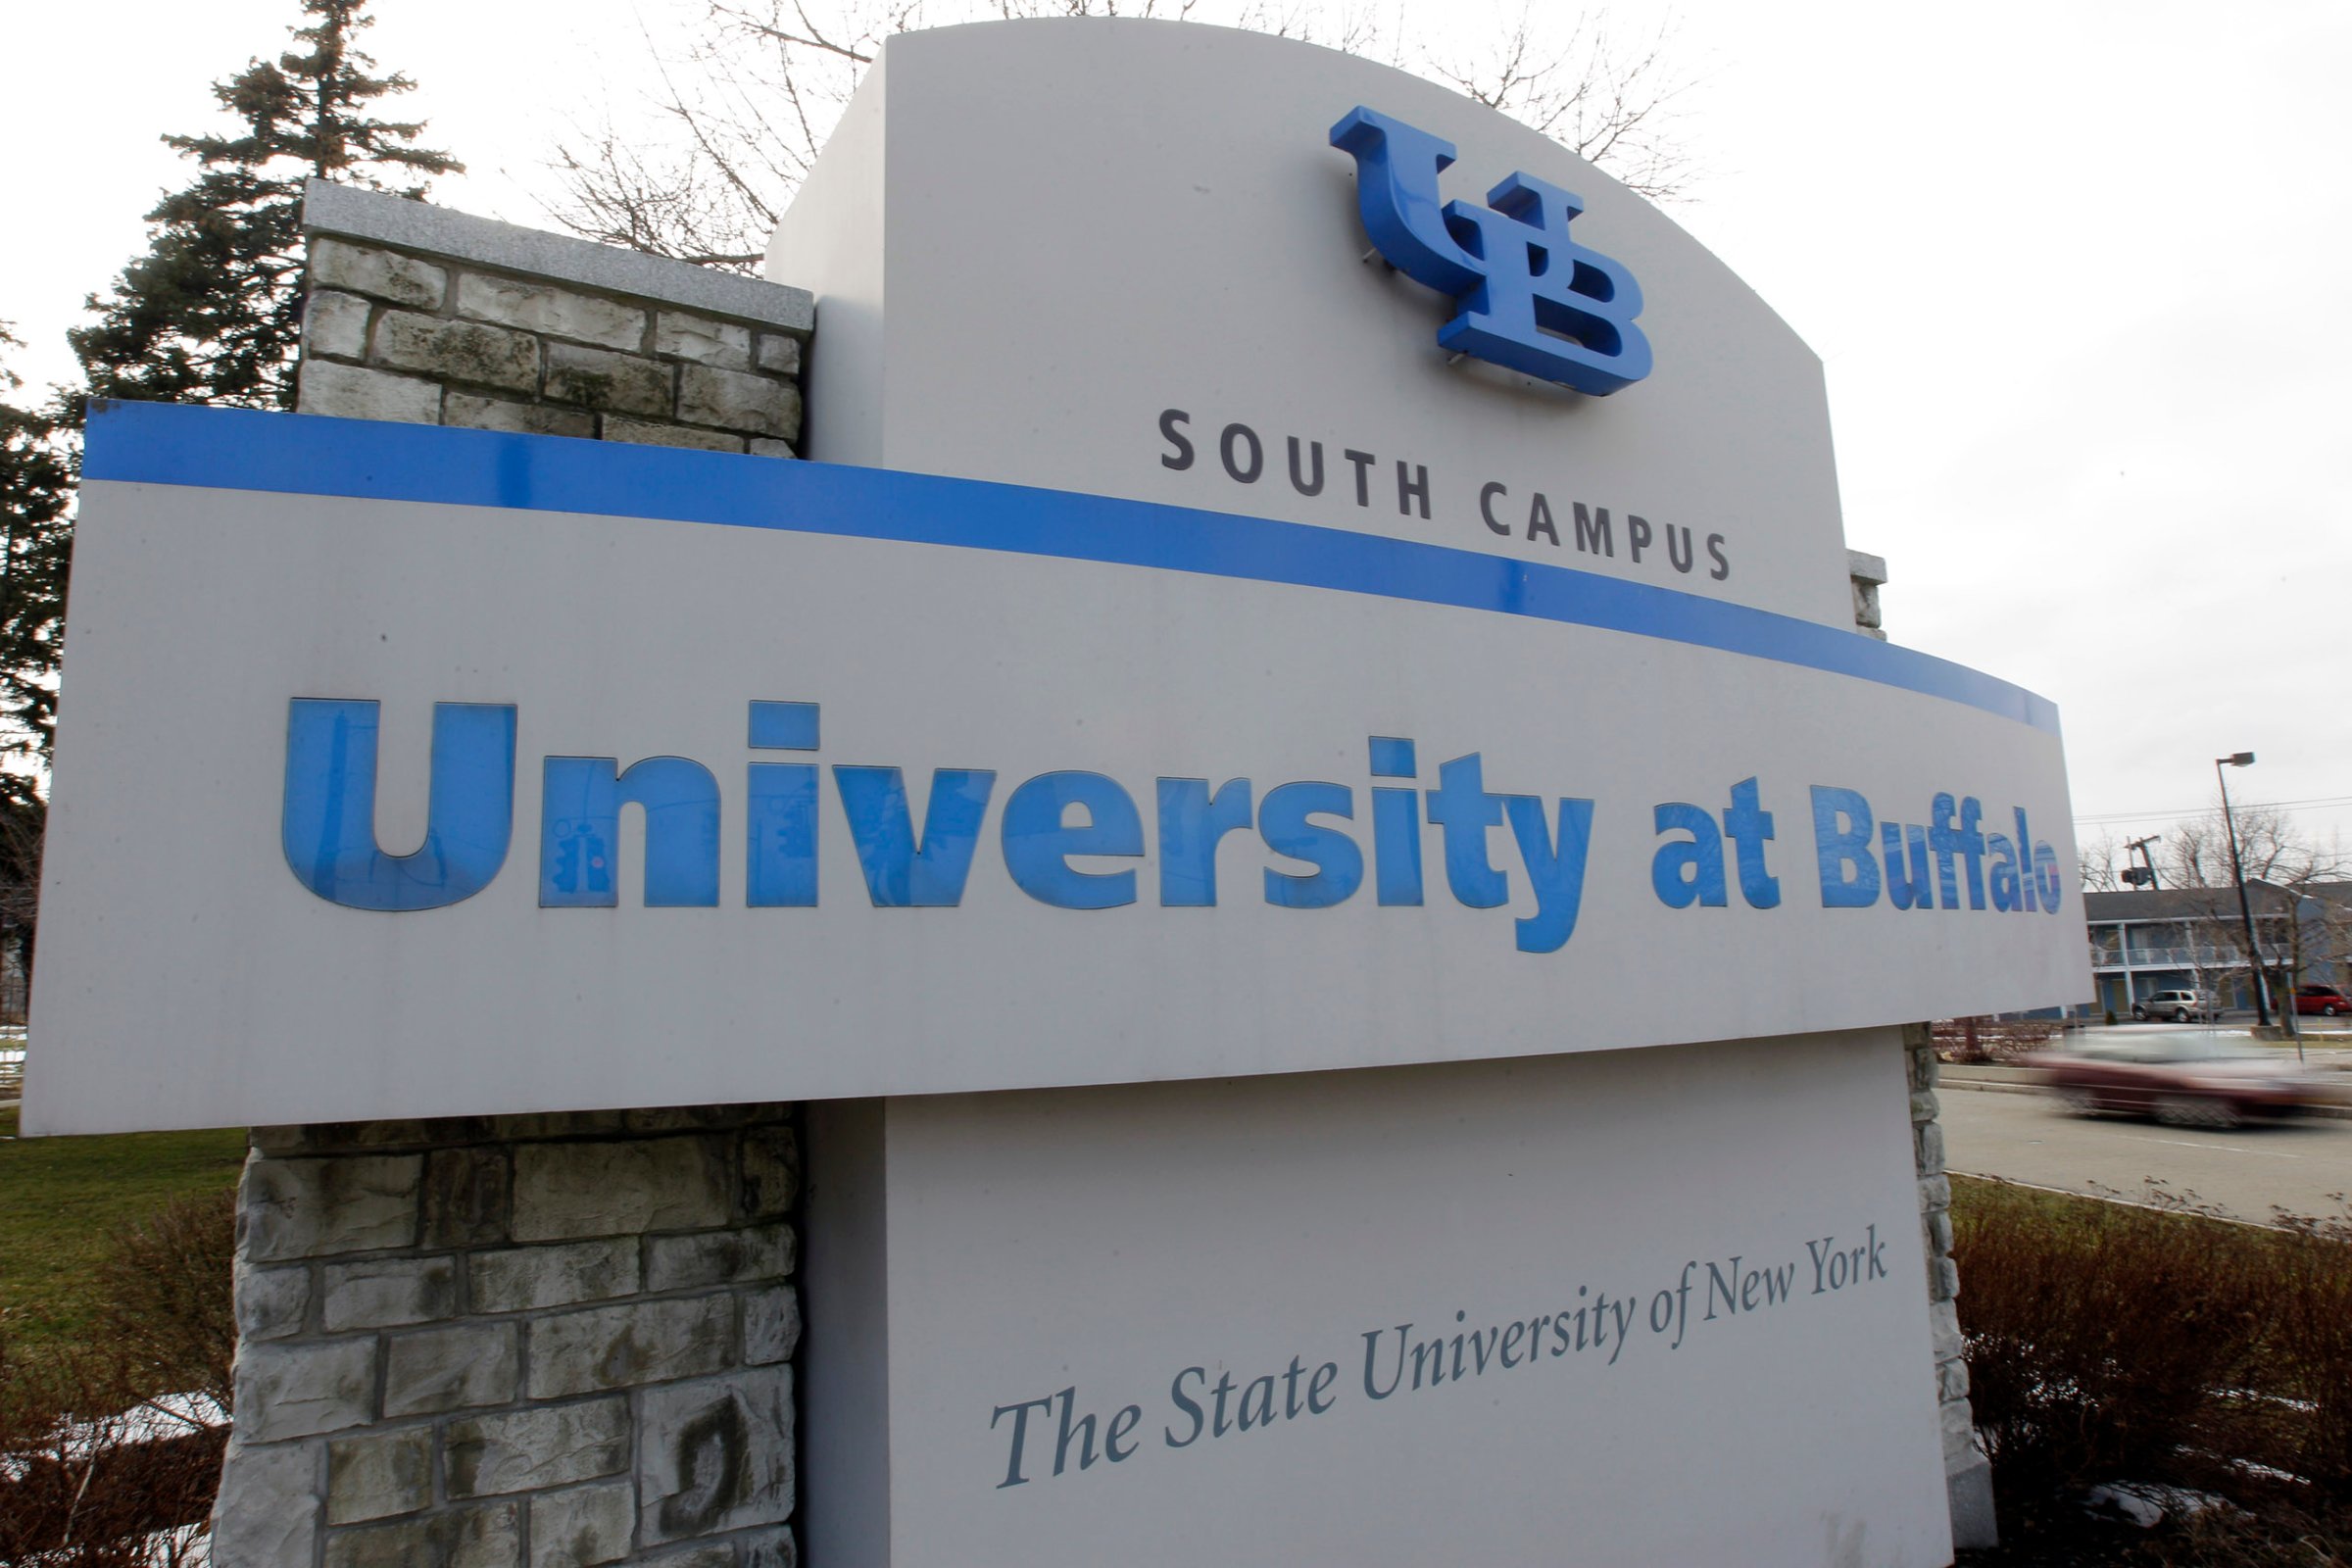 University at Buffalo sign on the campus in Buffalo, N.Y. on Feb. 15, 2012.